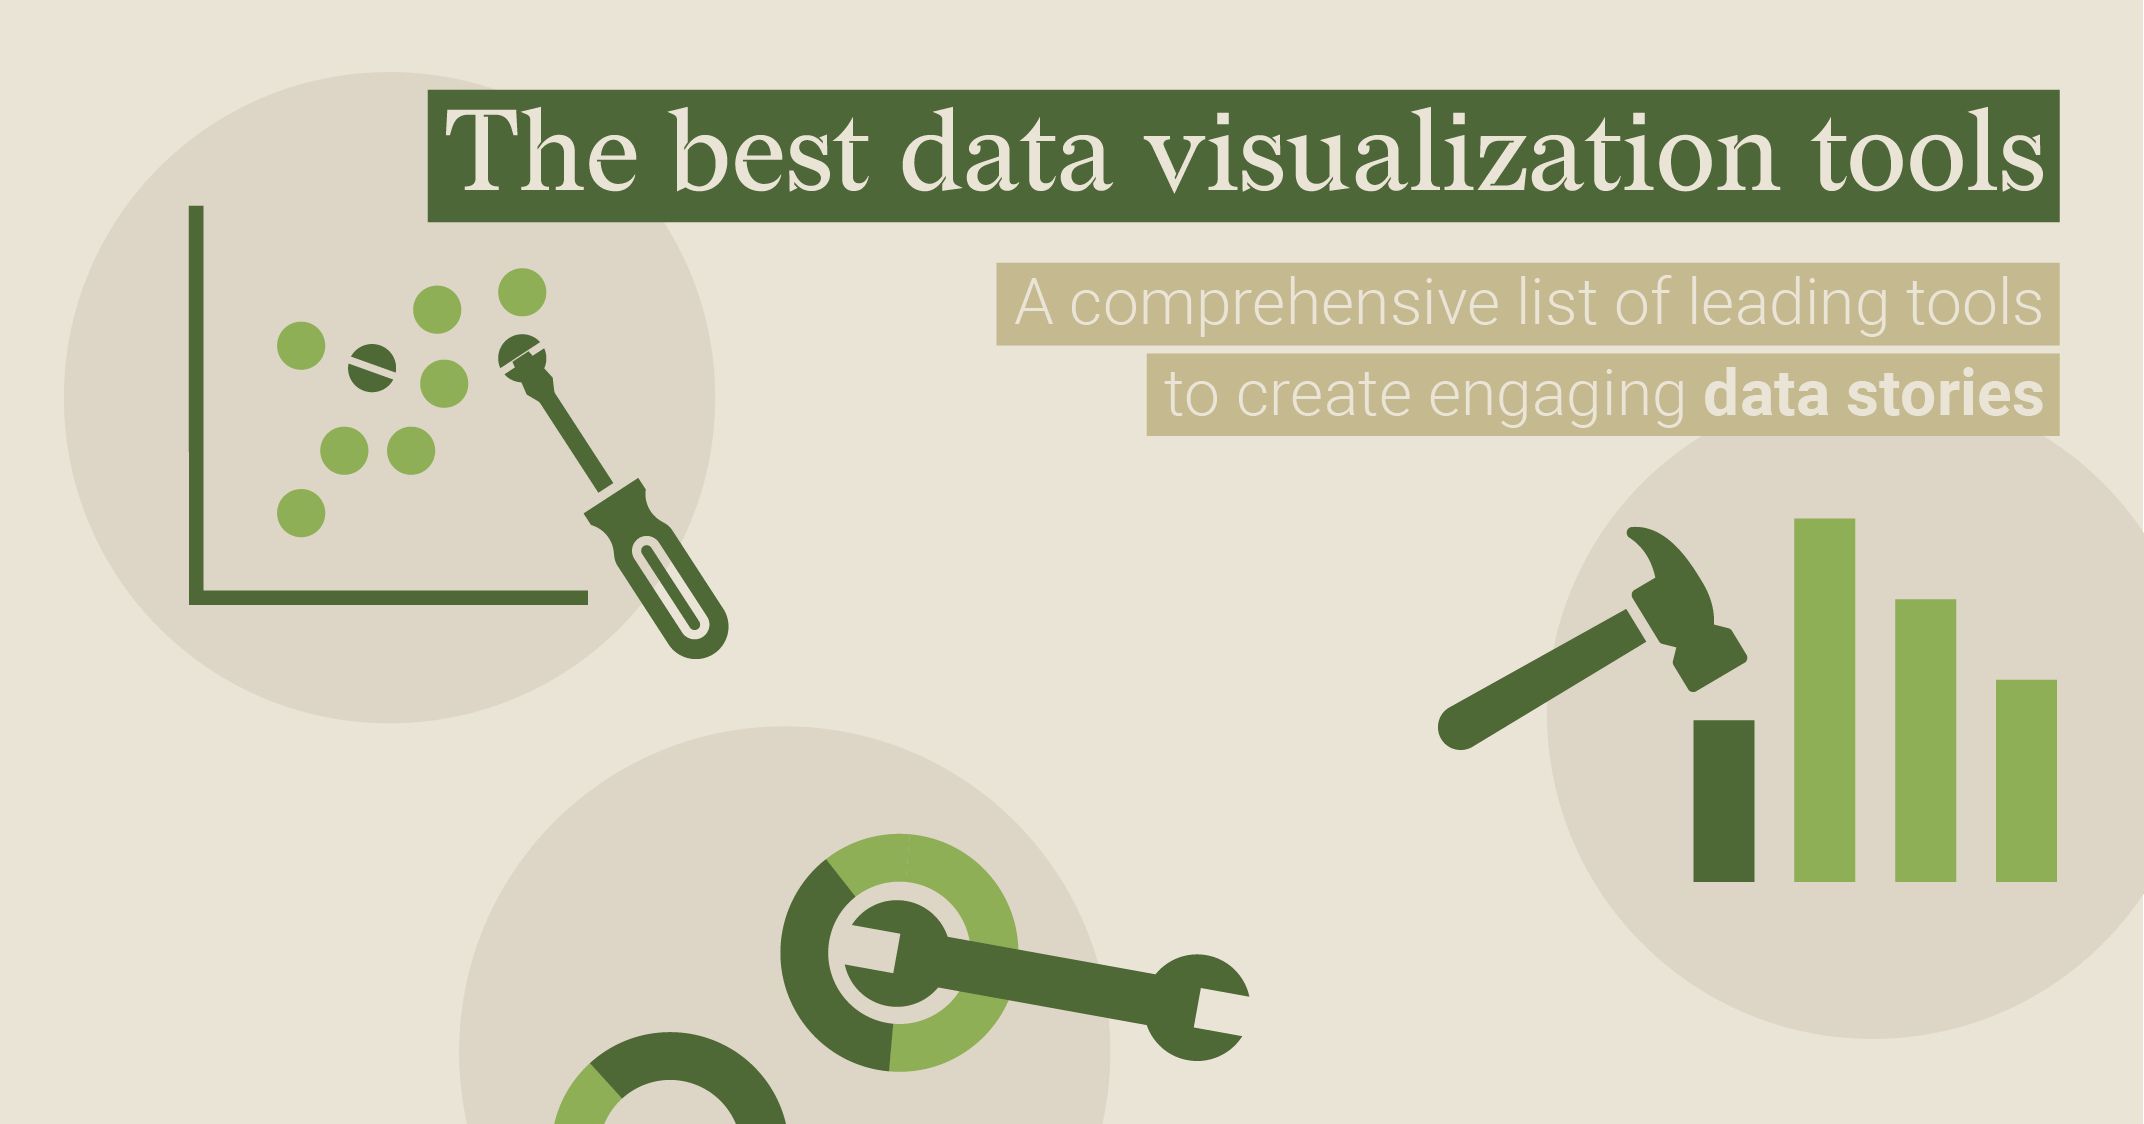 The best data visualization tools - charts & graphs, infographics & presentations, dashboards & automated reporting tools